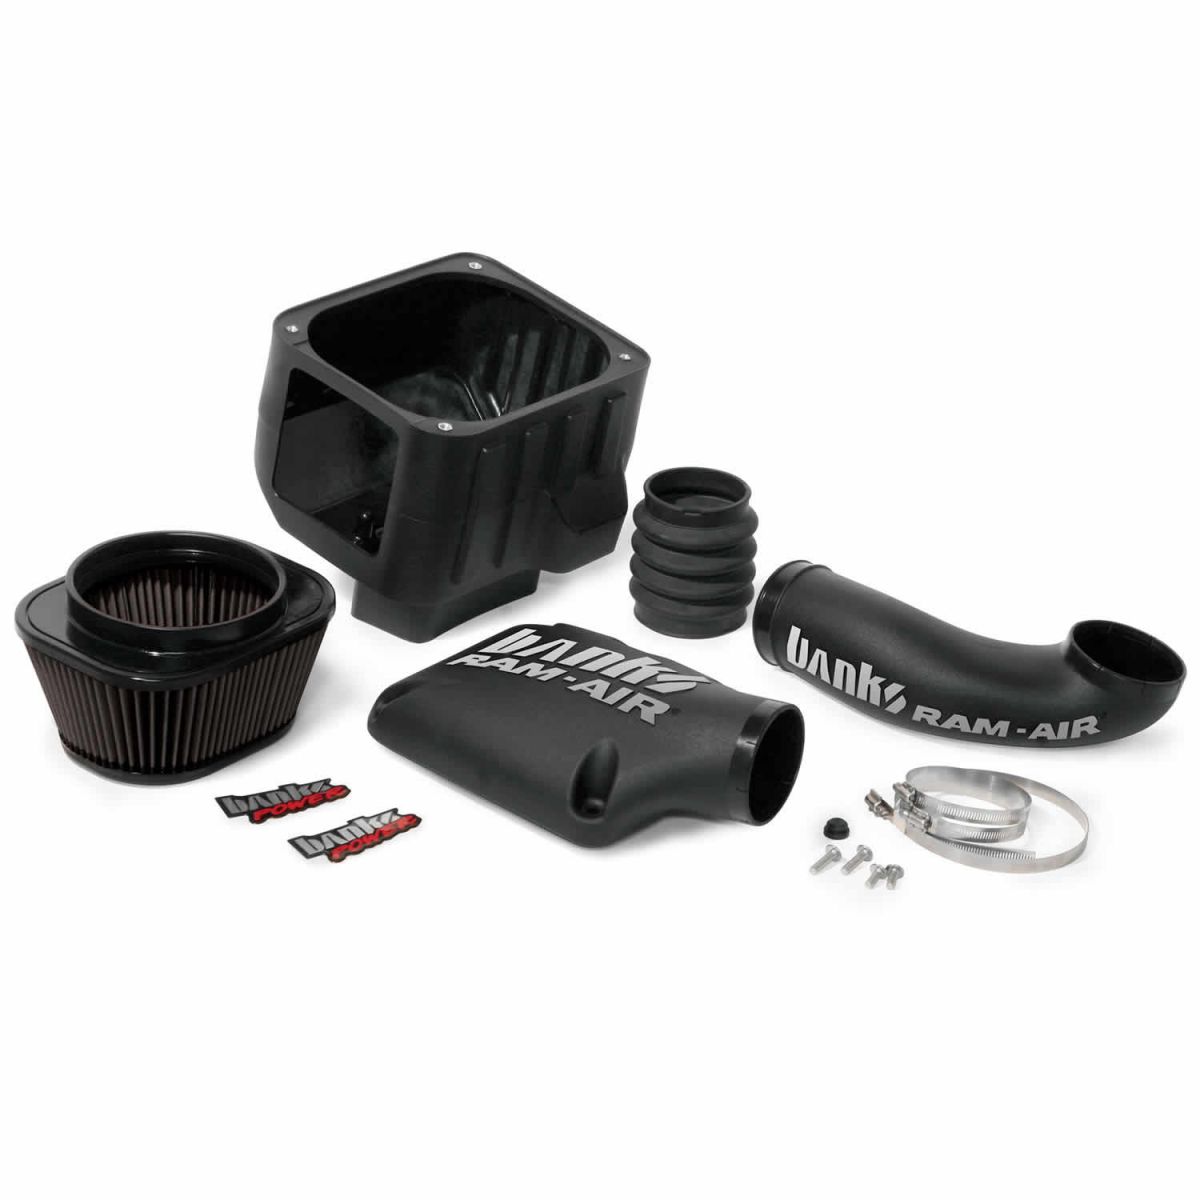 Banks Power - Banks Power Ram-Air Cold-Air Intake System Dry Filter 99-08 Chevy/GMC 4.8-6.0L 1500